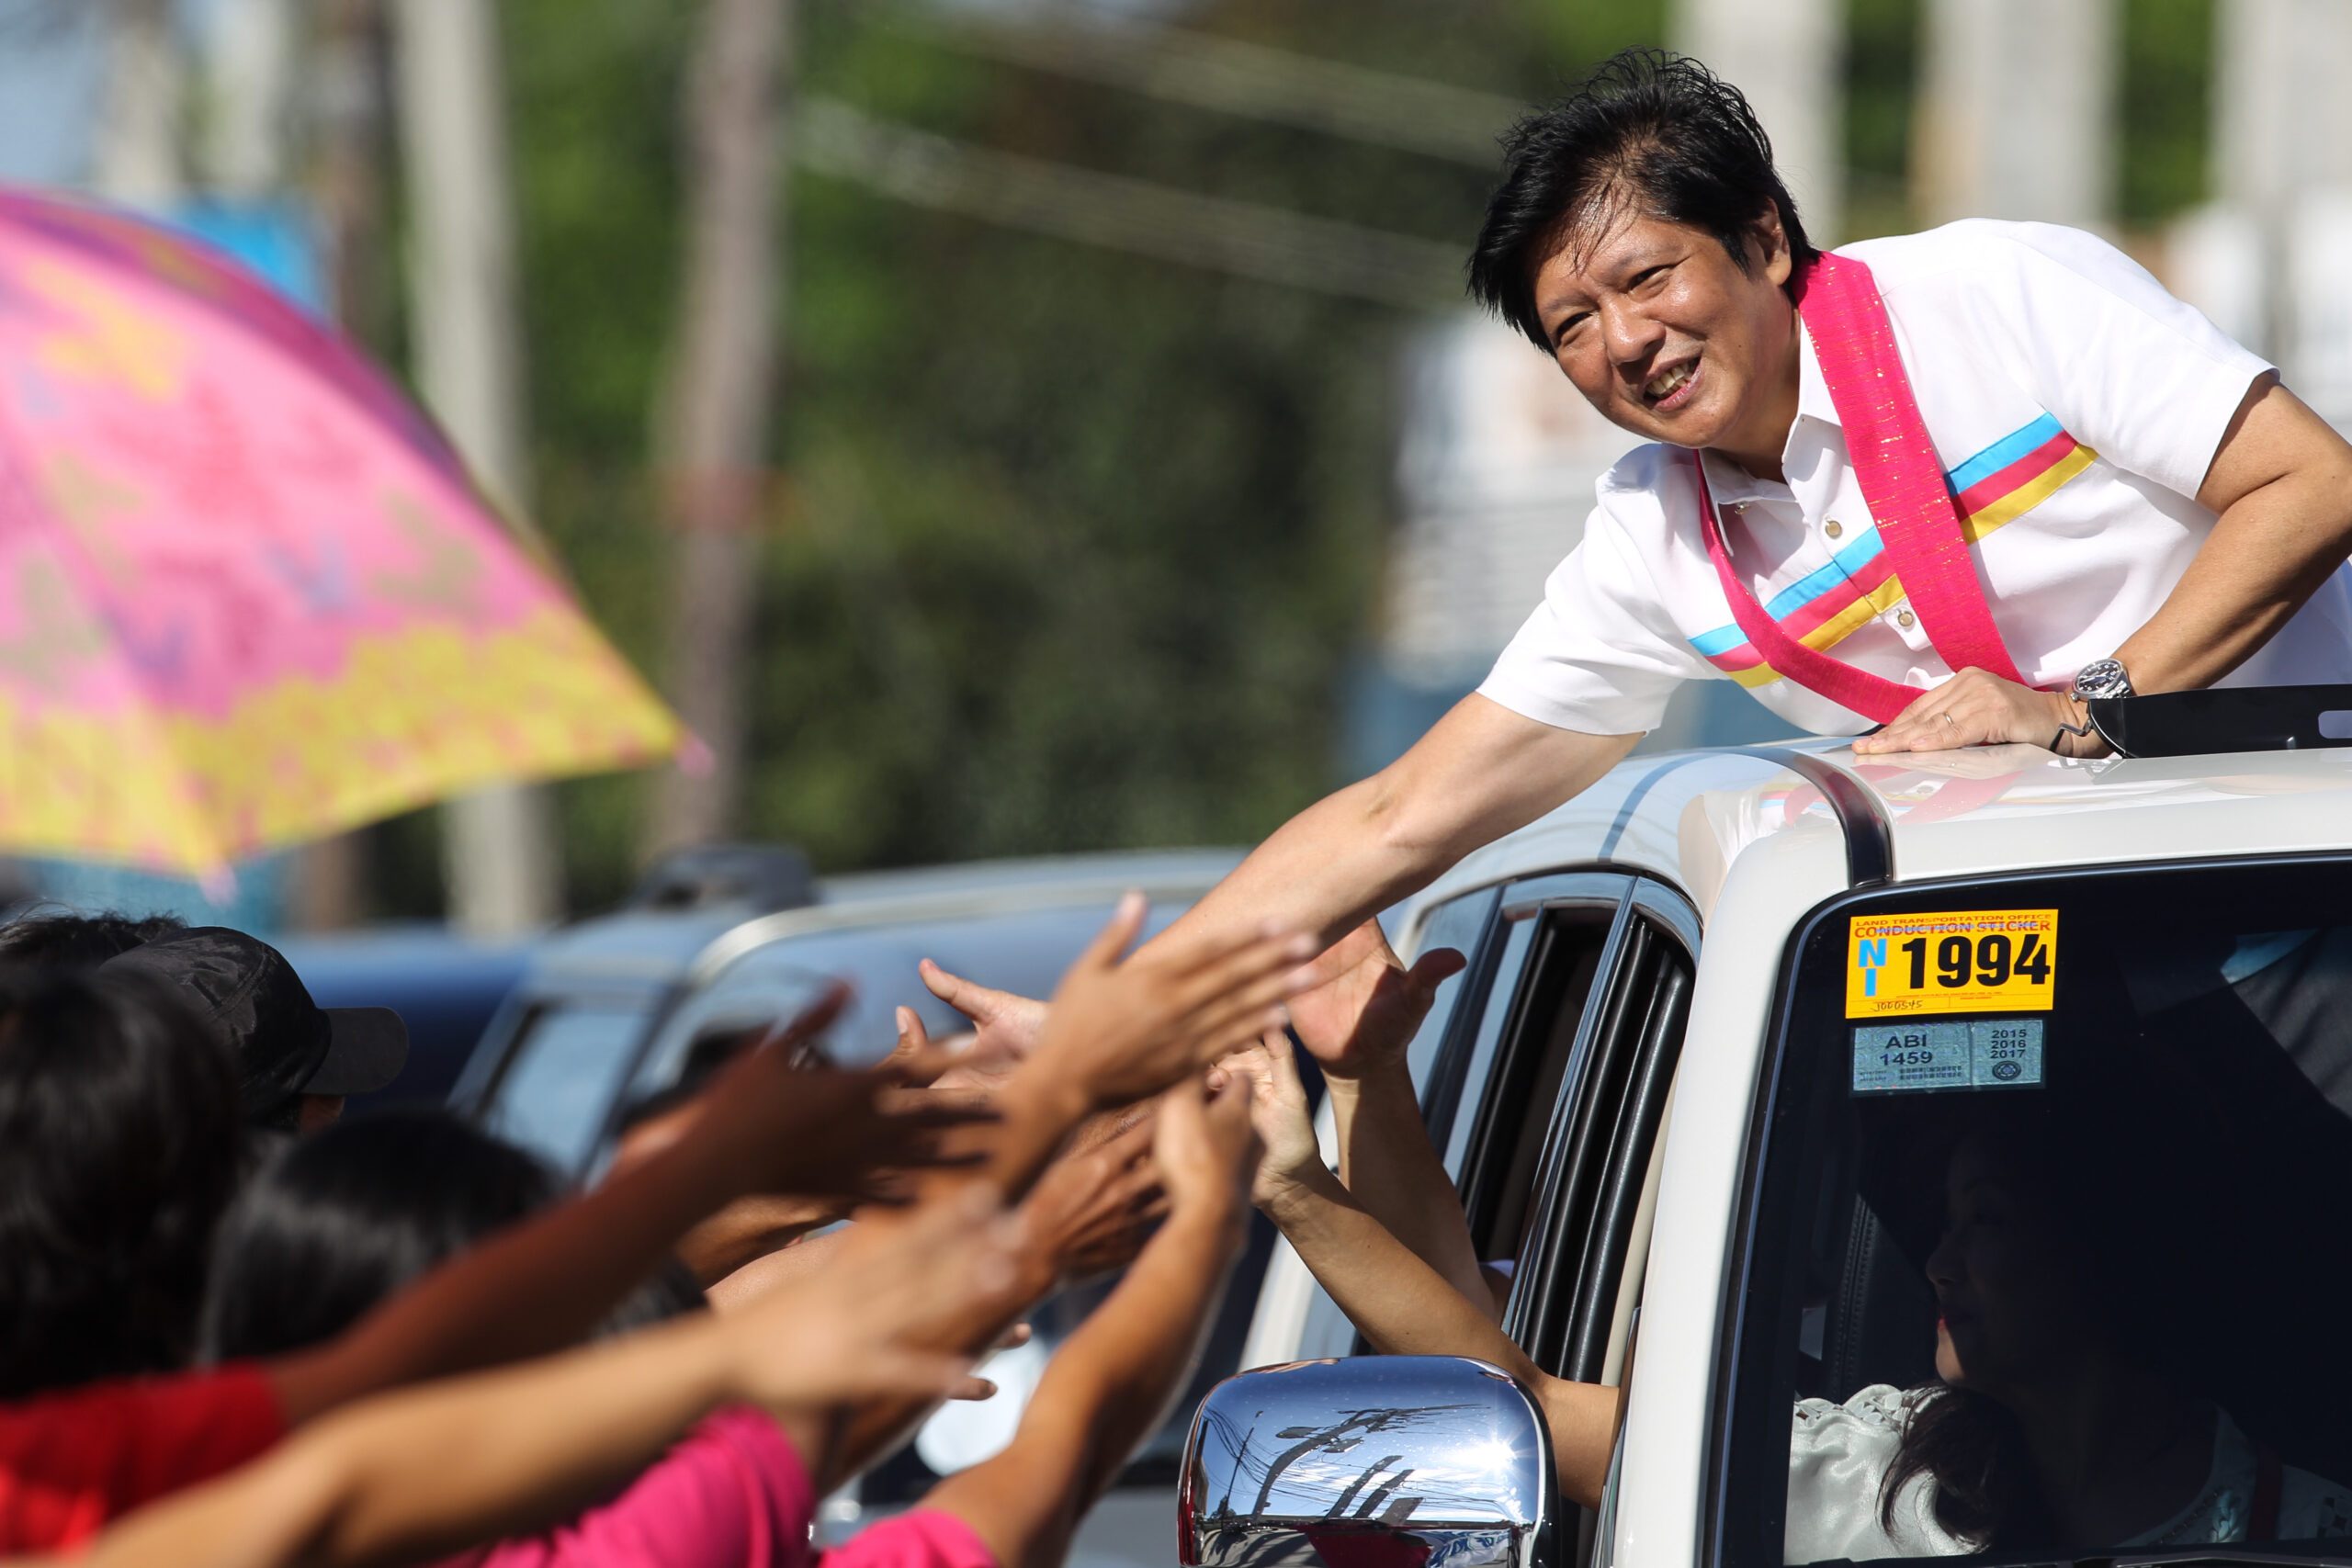 The Scrum: Why Bongbong Marcos might win as VP